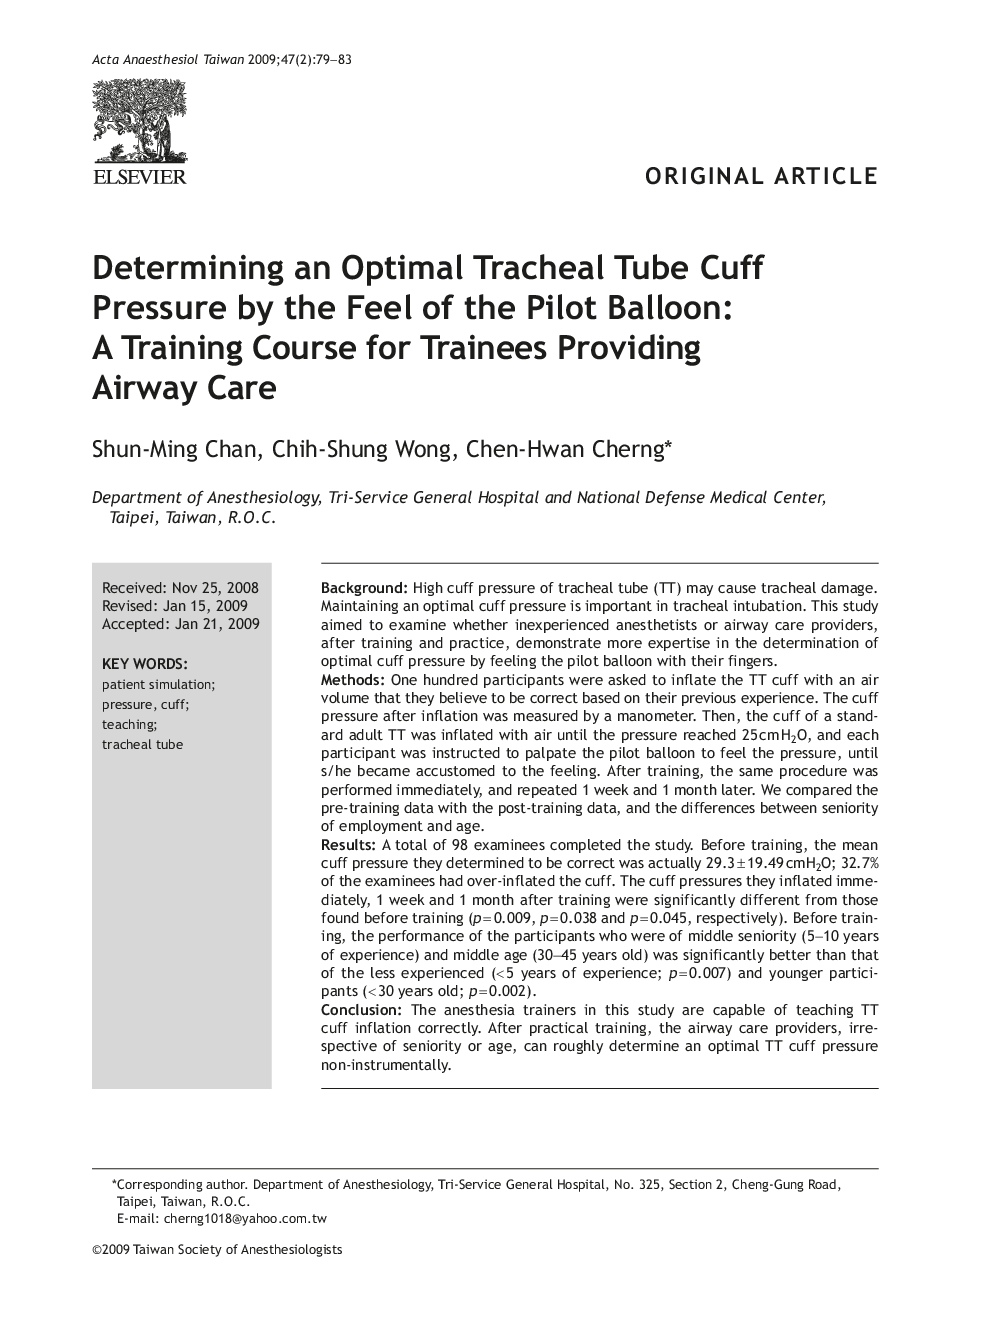 Determining an Optimal Tracheal Tube Cuff Pressure by the Feel of the Pilot Balloon: A Training Course for Trainees Providing Airway Care